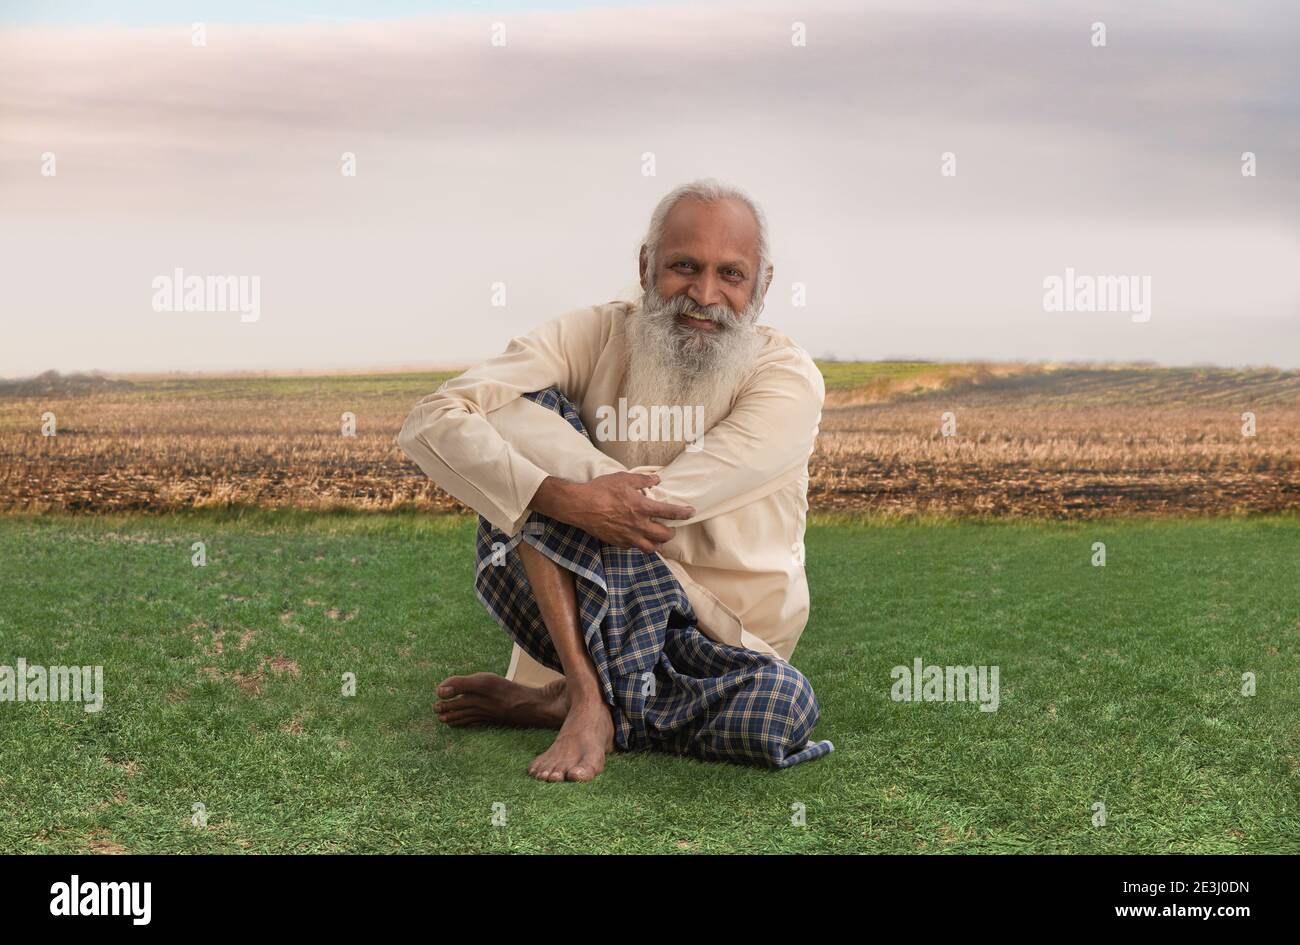 AN OLD FARMER HAPPILY SITTING ON GRASSLAND Stock Photo